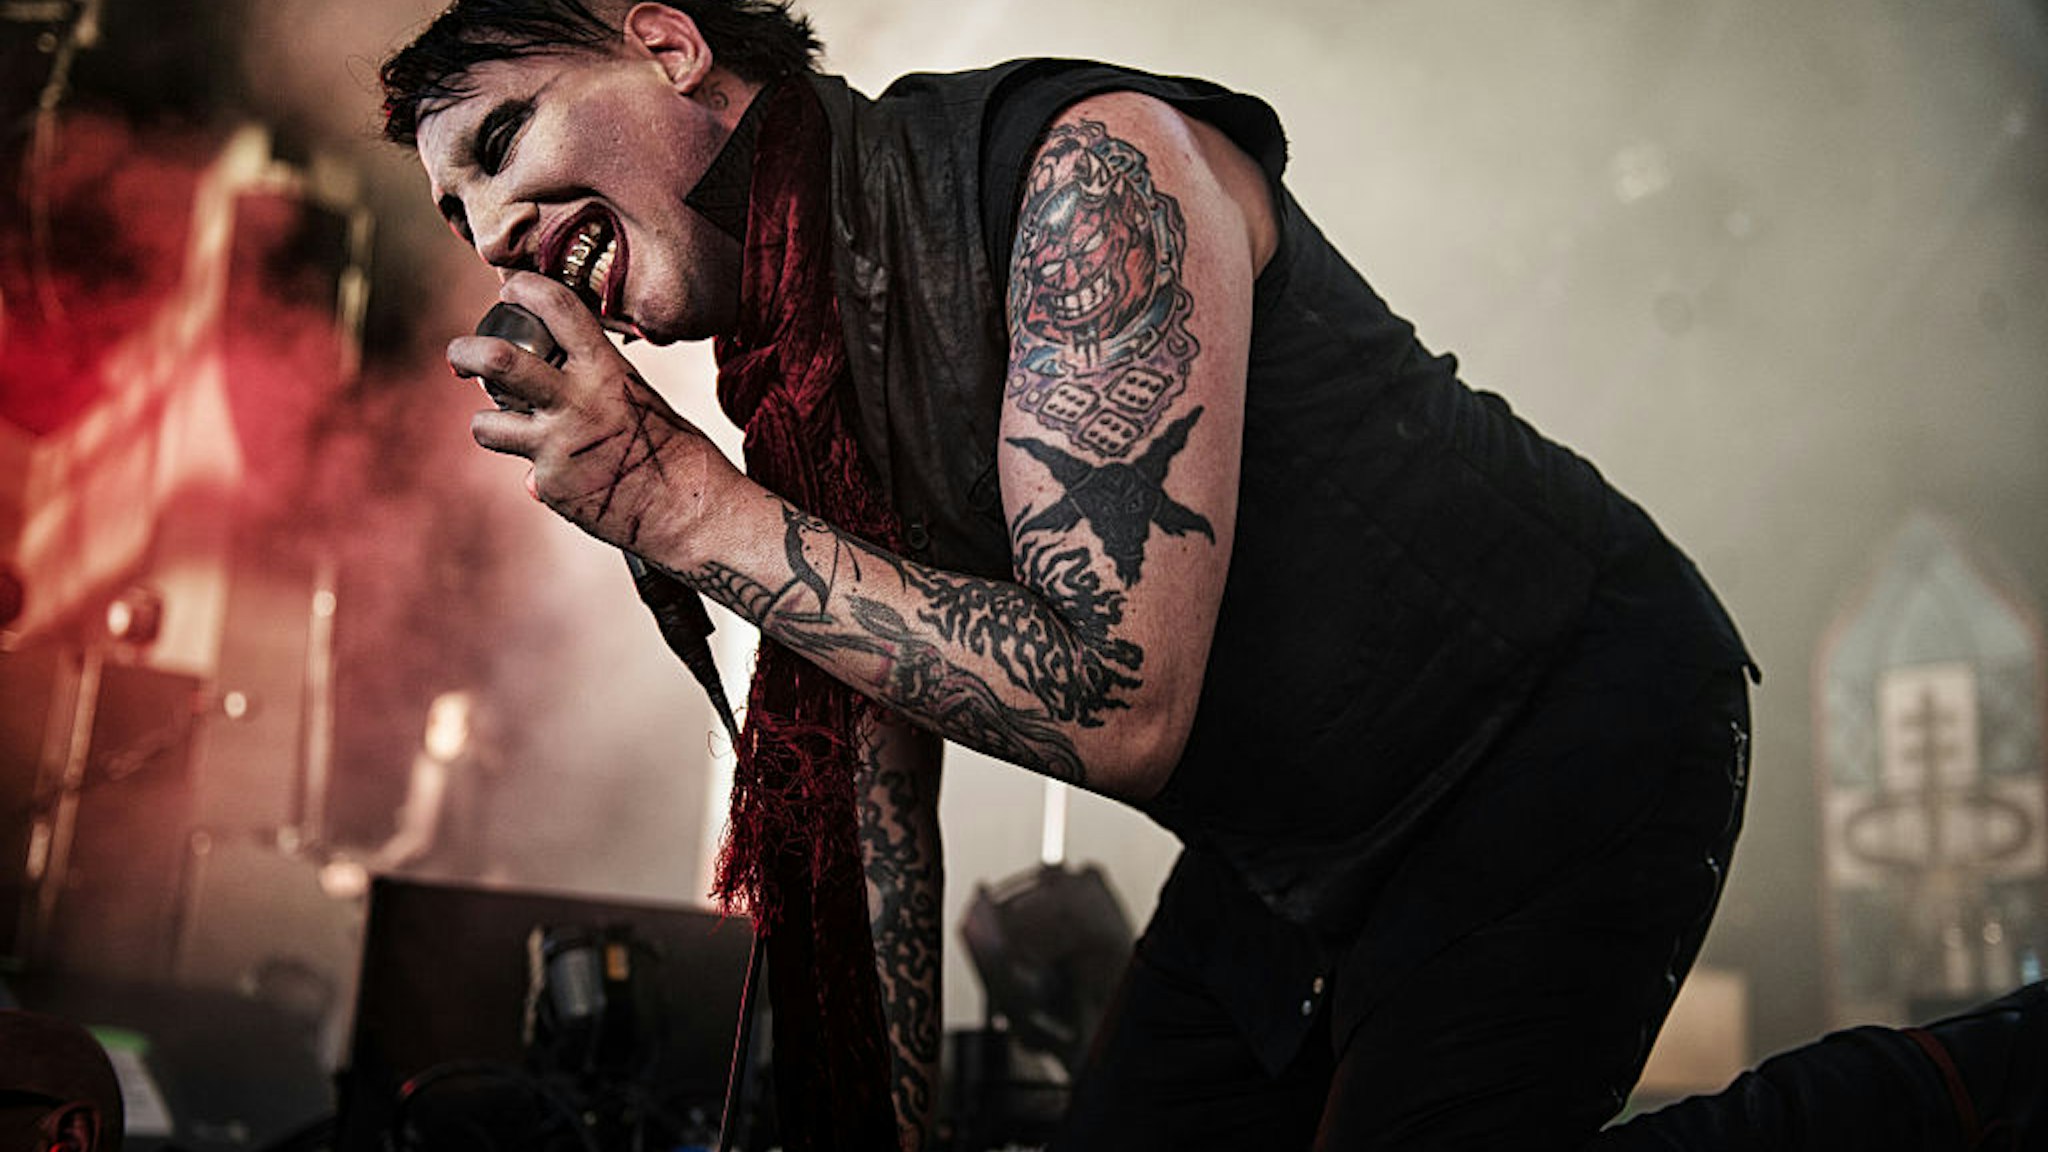 DALLAS, TX - July 15: Brian Hugh Warner performs as Marilyn Manson in concert at the Gexa Energy Pavilion on July 15, 2015 in Dallas, Texas. (Photo by Mike Brooks/DAL/Voice Media Group via Getty Images)